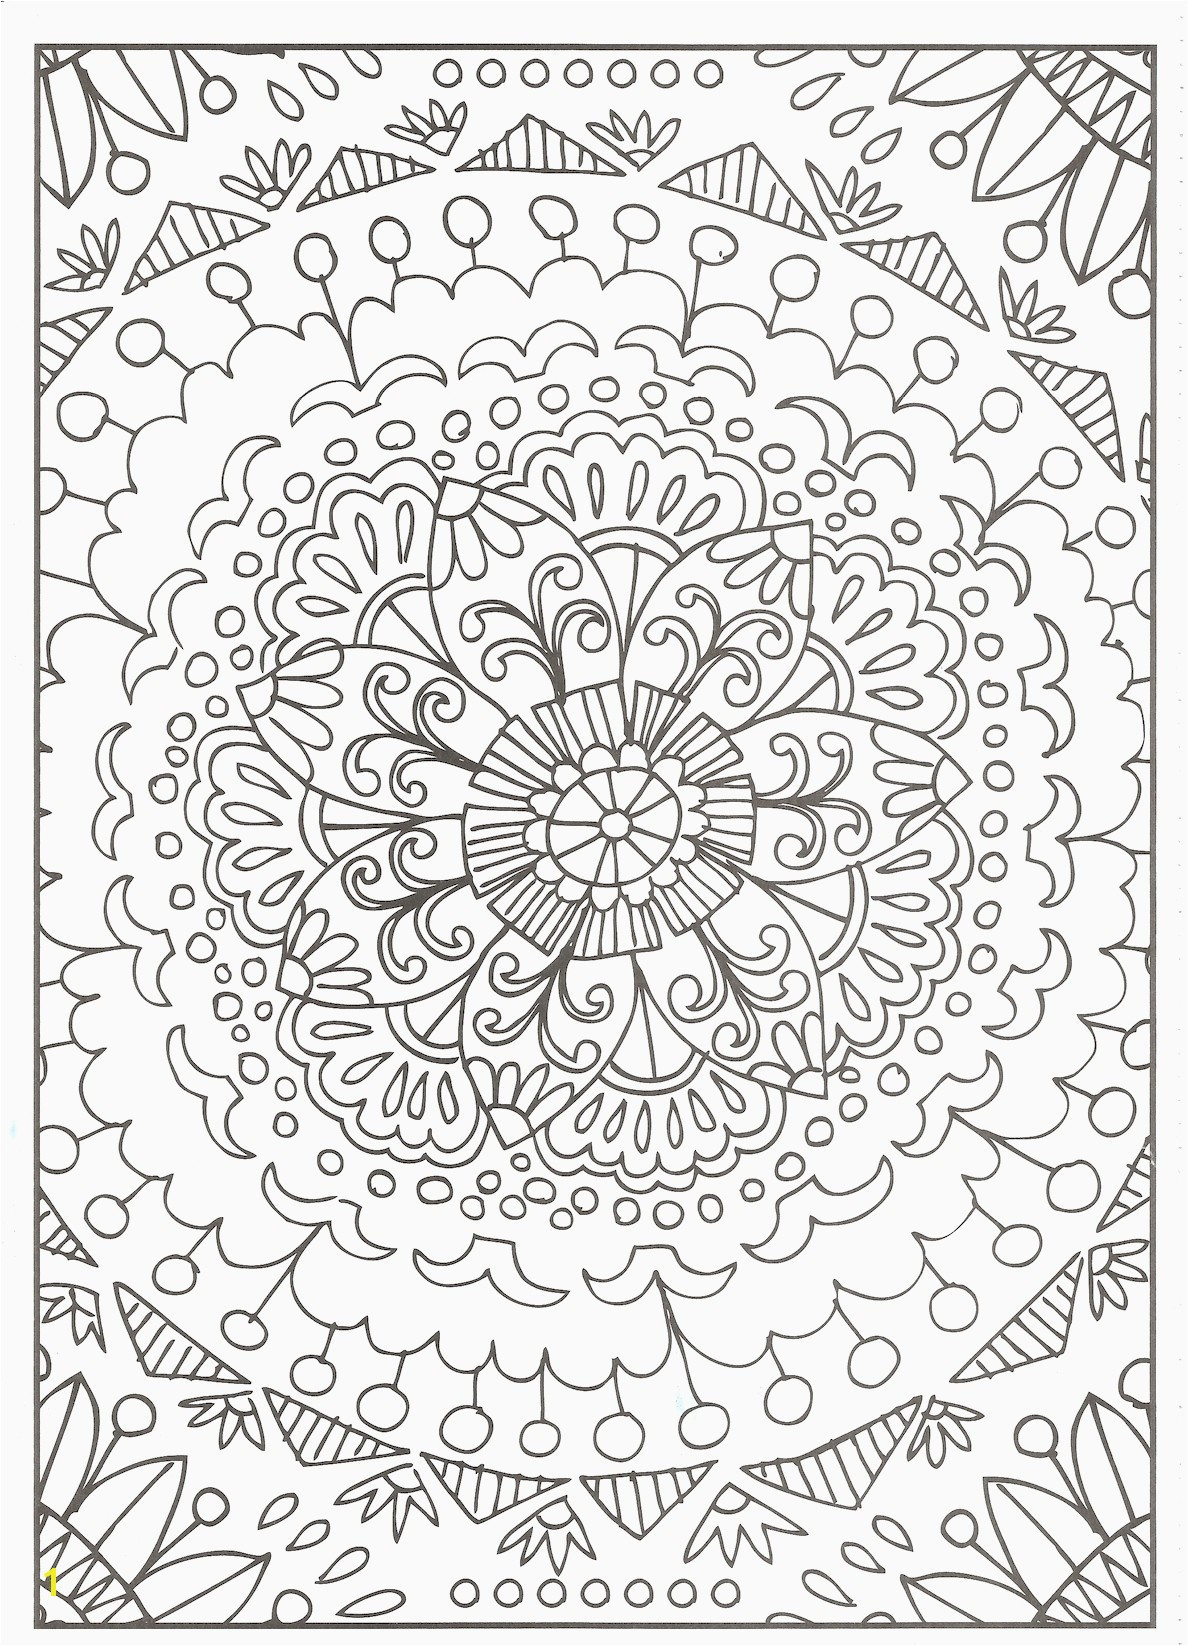 12 Famous Picture Of A Flower Vase to Color 2024 free download picture of a flower vase to color of flower images coloring pages zabelyesayan com inside cool vases flower vase coloring page pages flowers in a top i 0d